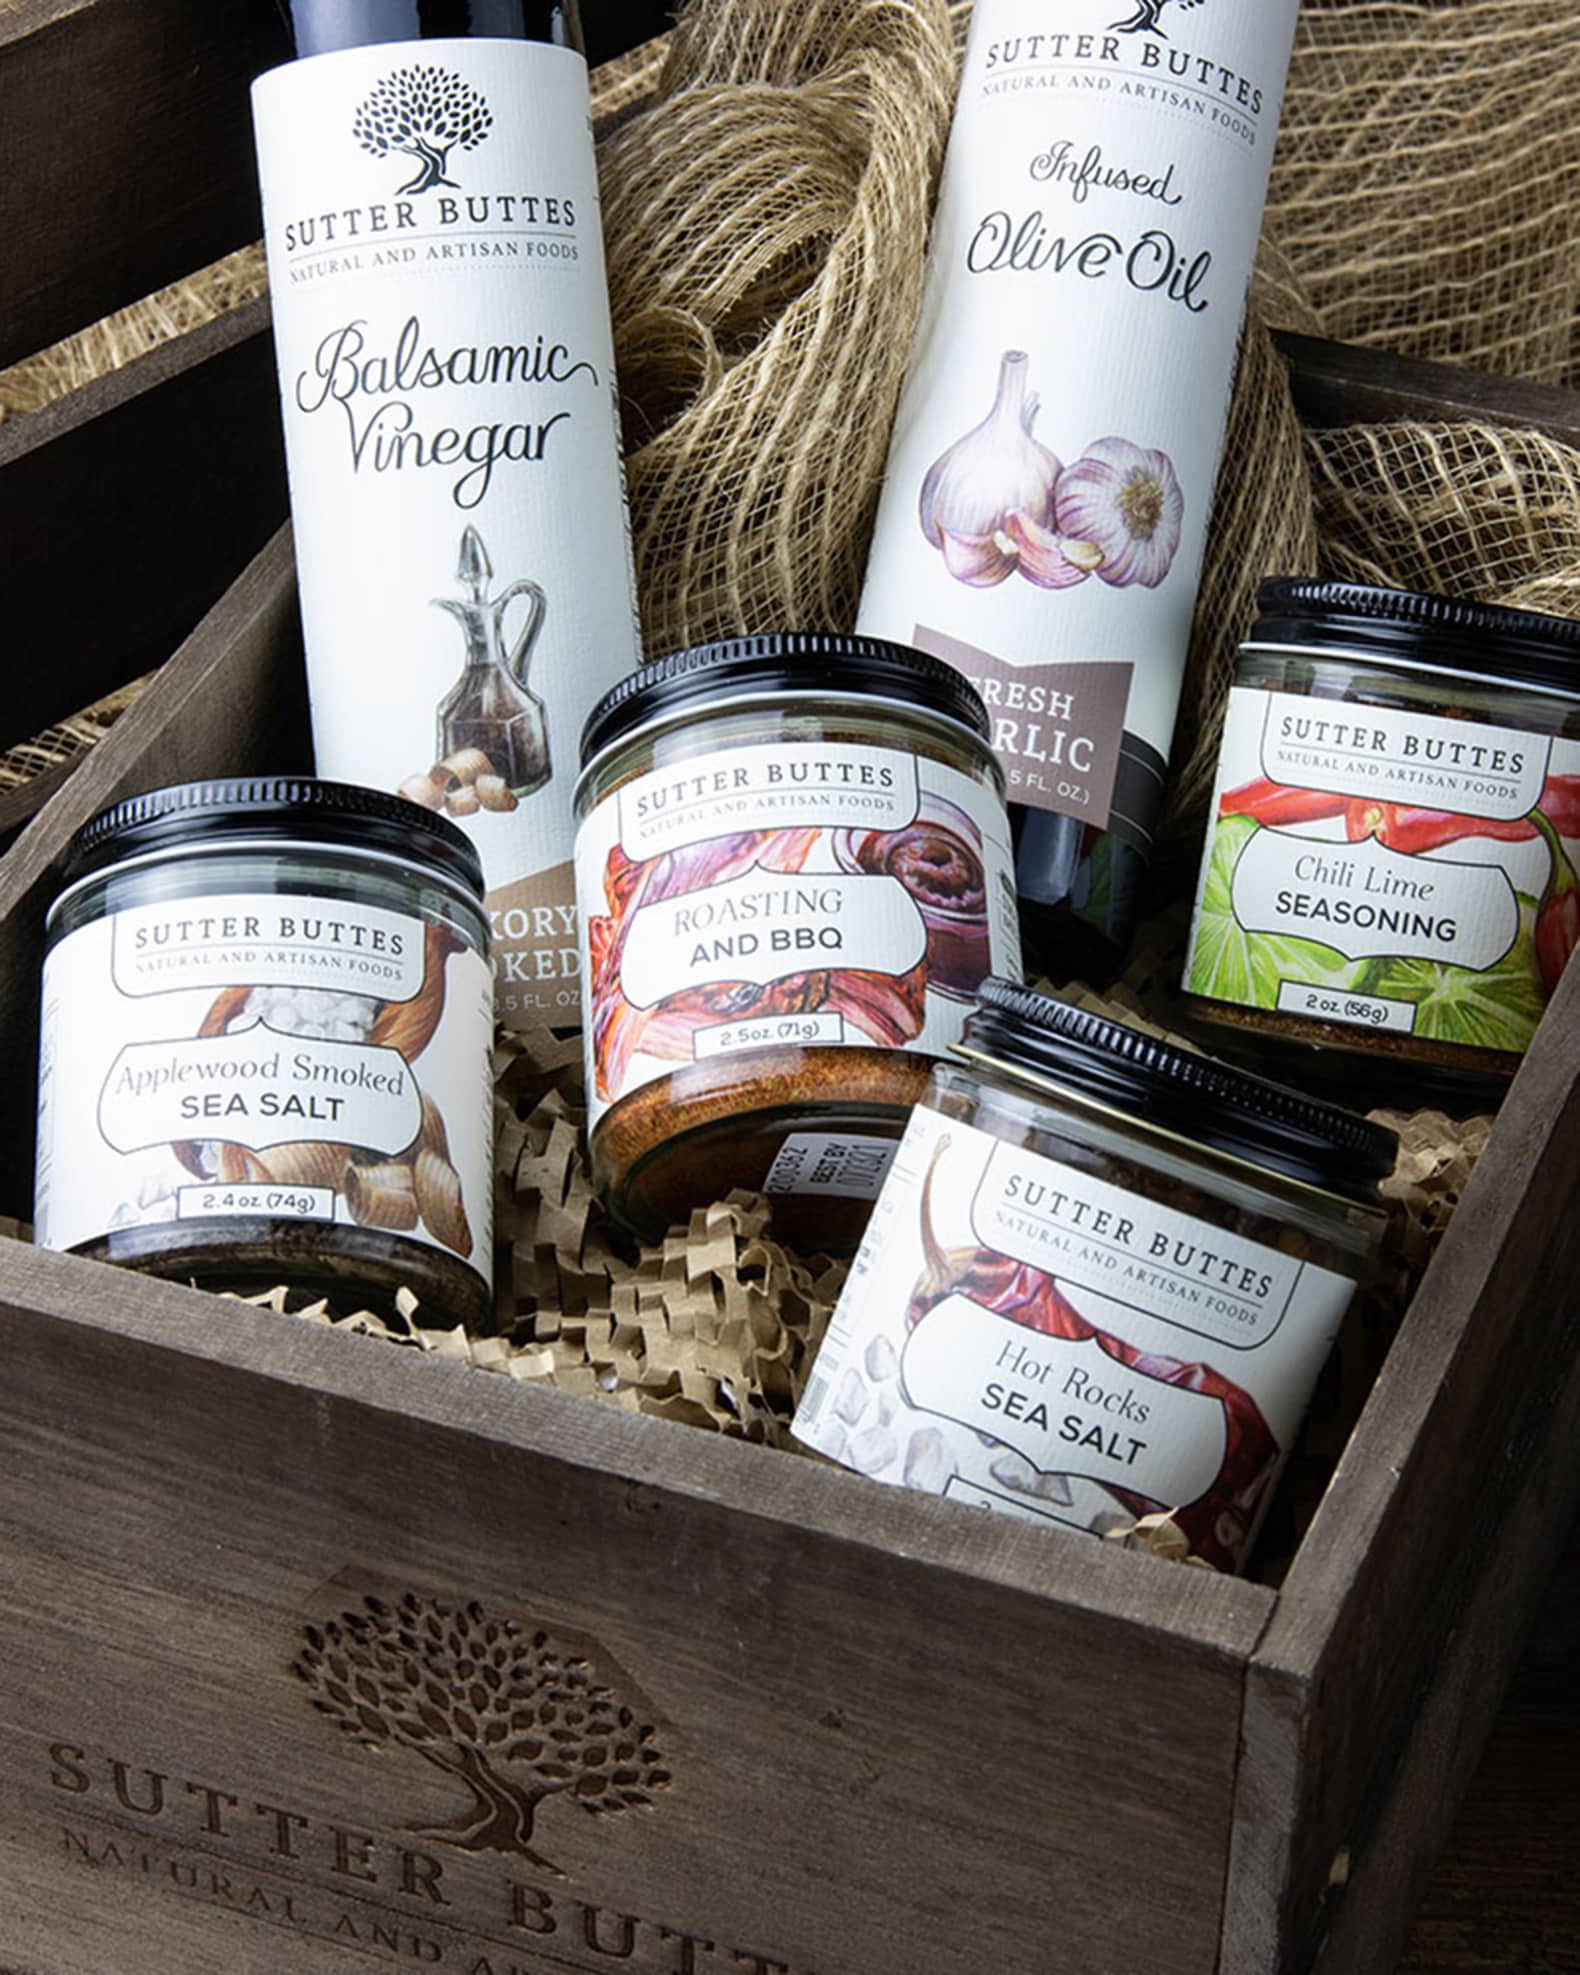 Sutter Buttes Natural and Artisan Foods Best Sellers Gift Crate